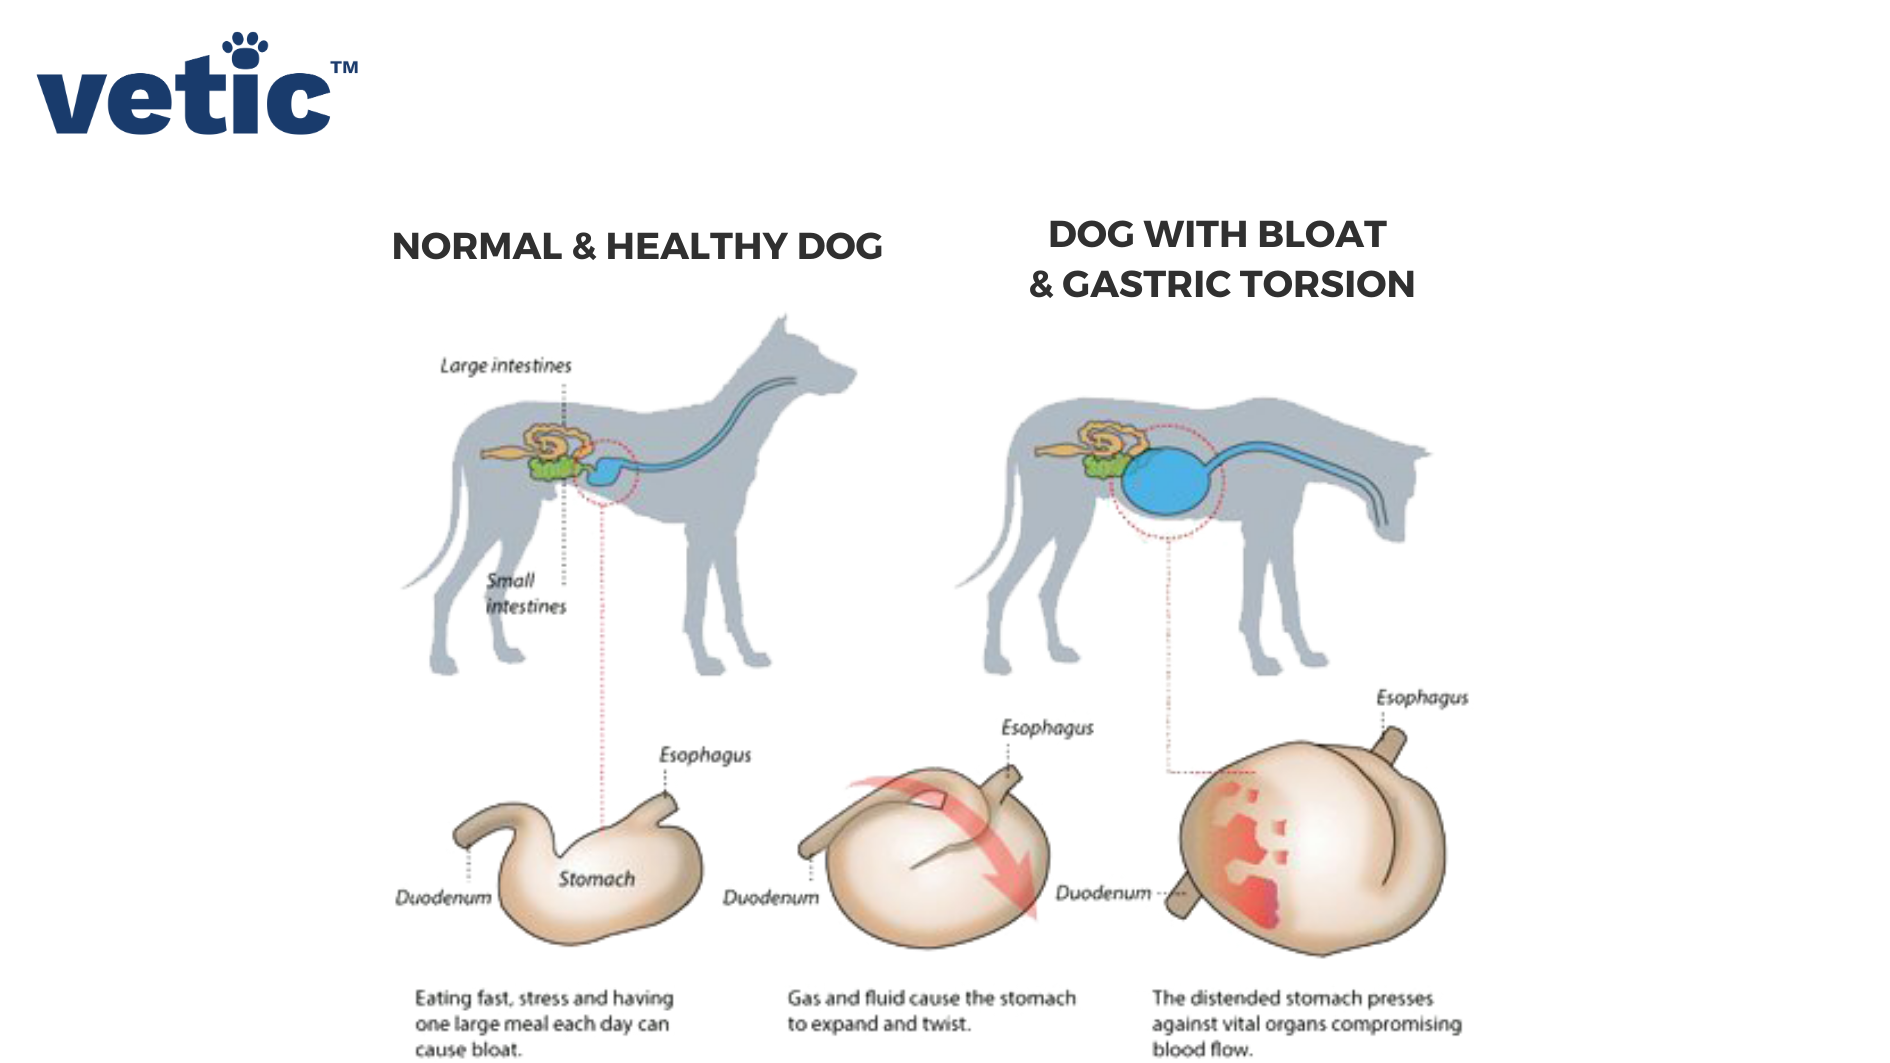 A chart of the different postures of a dog that signifies good health as compared to a dog with bloat and gastric torsion. The bottom of the image is dedicated to how to stomach twists upon itself to cut off blood flow to and from the lower part of the intestine.